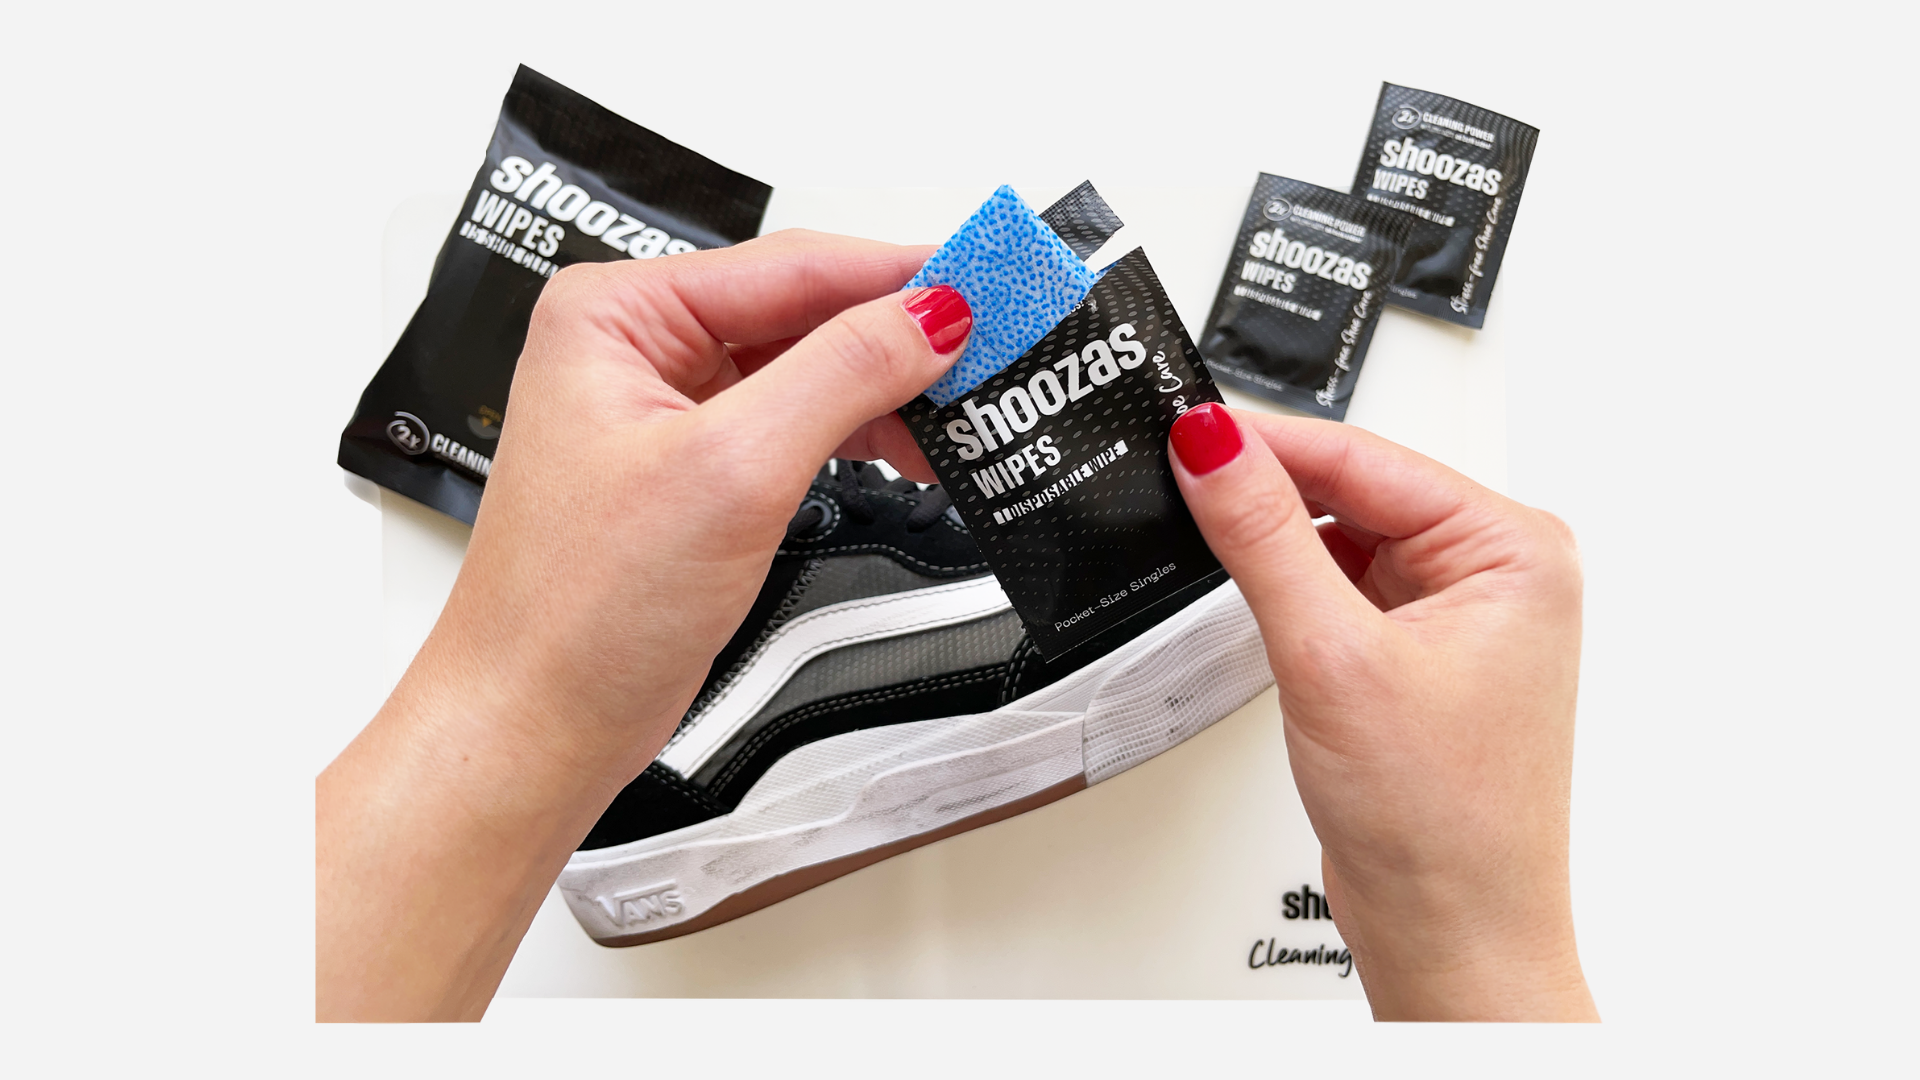 Load video: Tutorial on how to clean your shoes with shoe wipes.